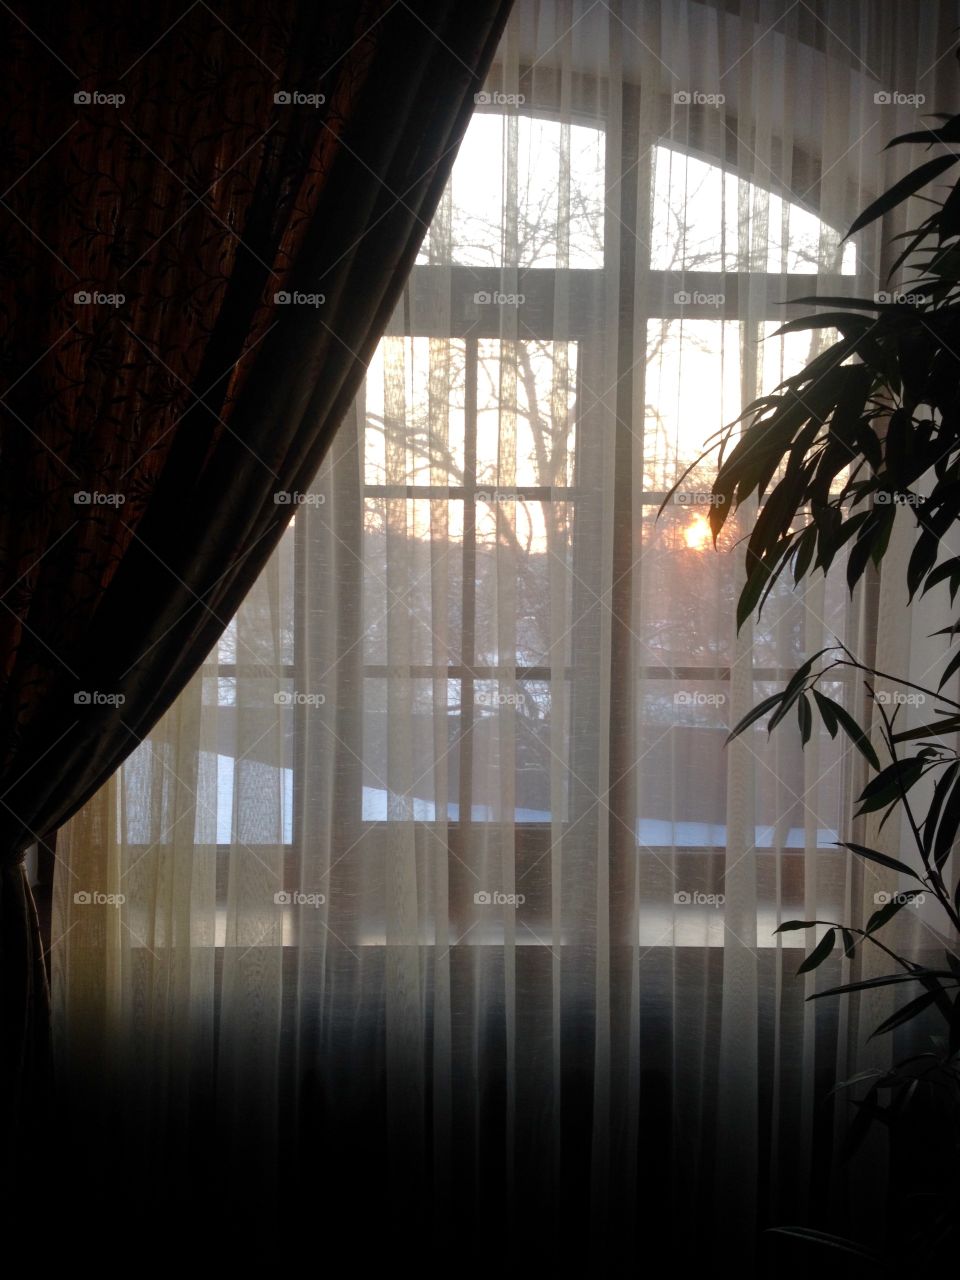 Sunrise through the curtains in the room